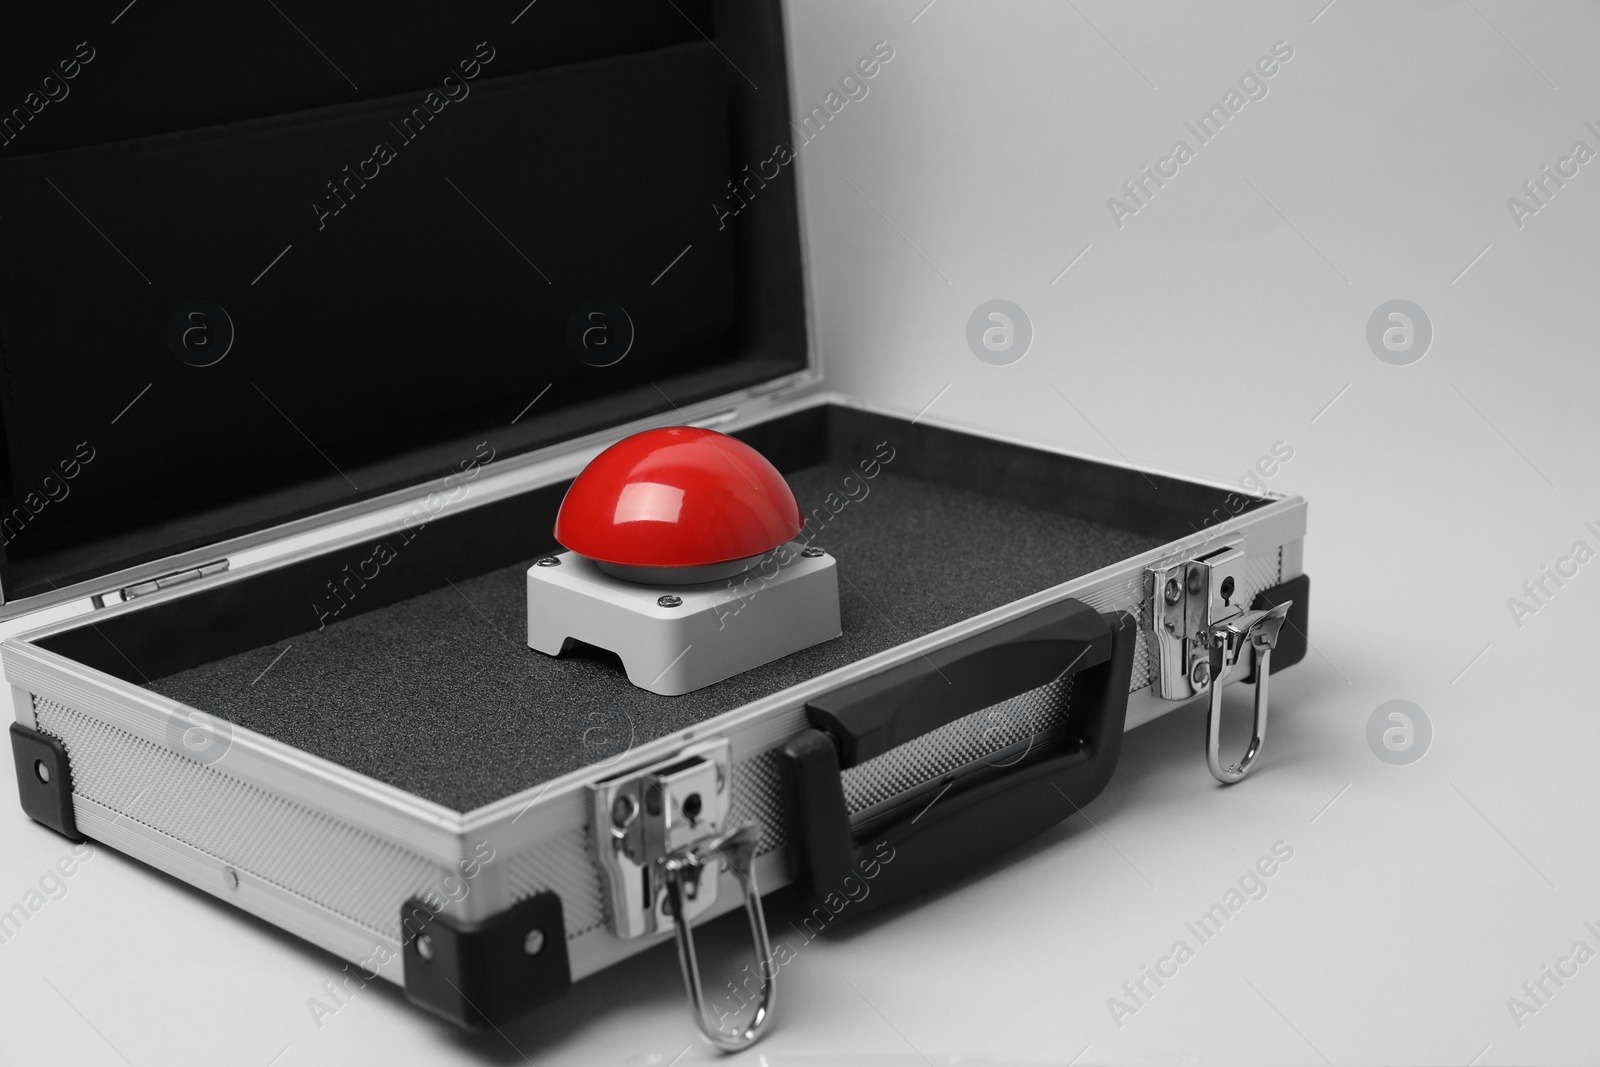 Photo of Red button of nuclear weapon in suitcase on white background. War concept